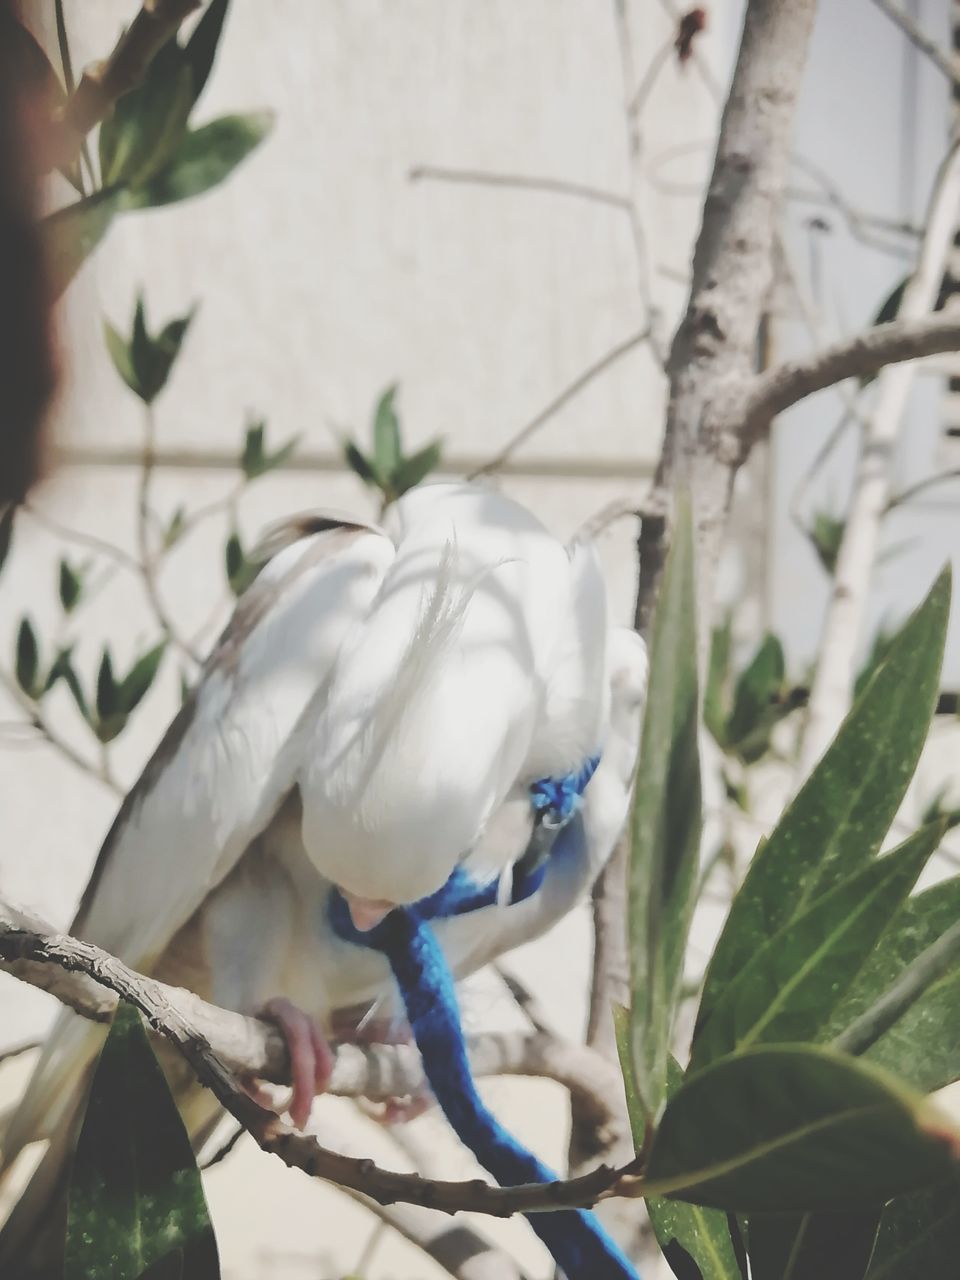 bird, animal, animal themes, animal wildlife, plant, tree, branch, wildlife, nature, flower, perching, leaf, plant part, no people, one animal, white, outdoors, beauty in nature, parrot, blue, day, spring, beak, focus on foreground